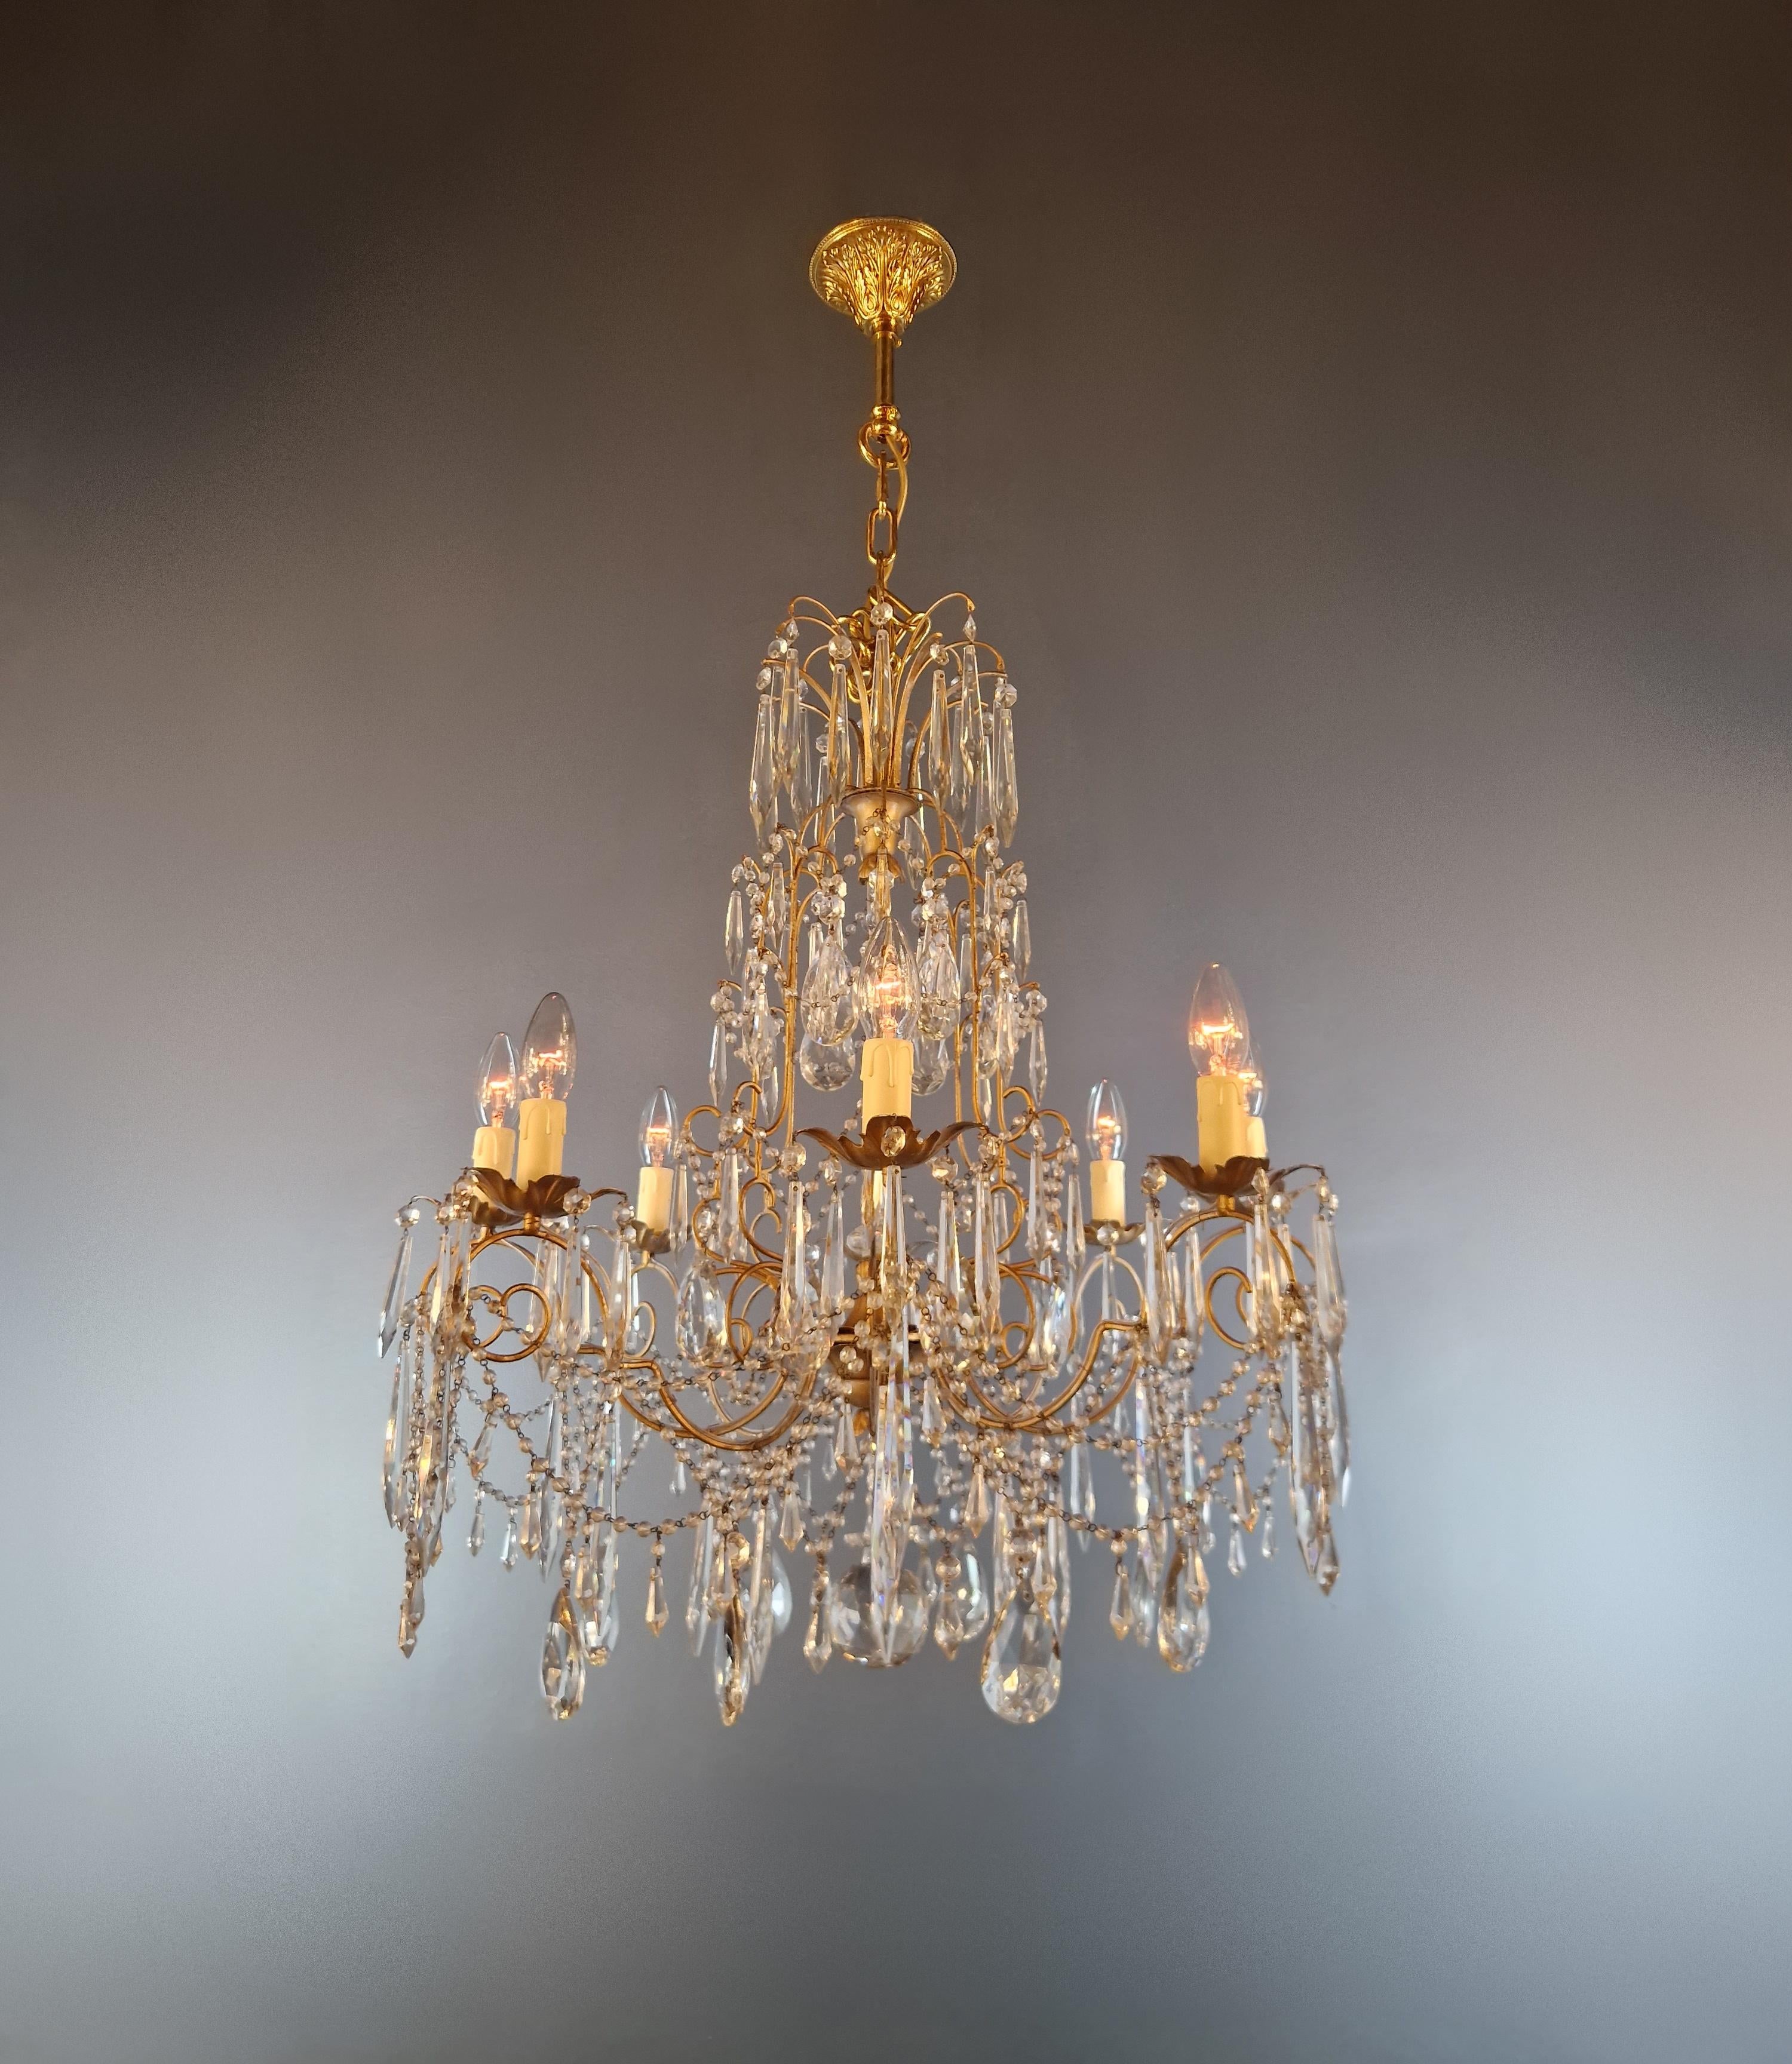 Elegant antique chandelier: a testament to craftsmanship and grace

Experience the revived splendor of the past in our meticulously restored vintage chandelier, a true masterpiece that embodies the pinnacle of Art Nouveau design. With the greatest